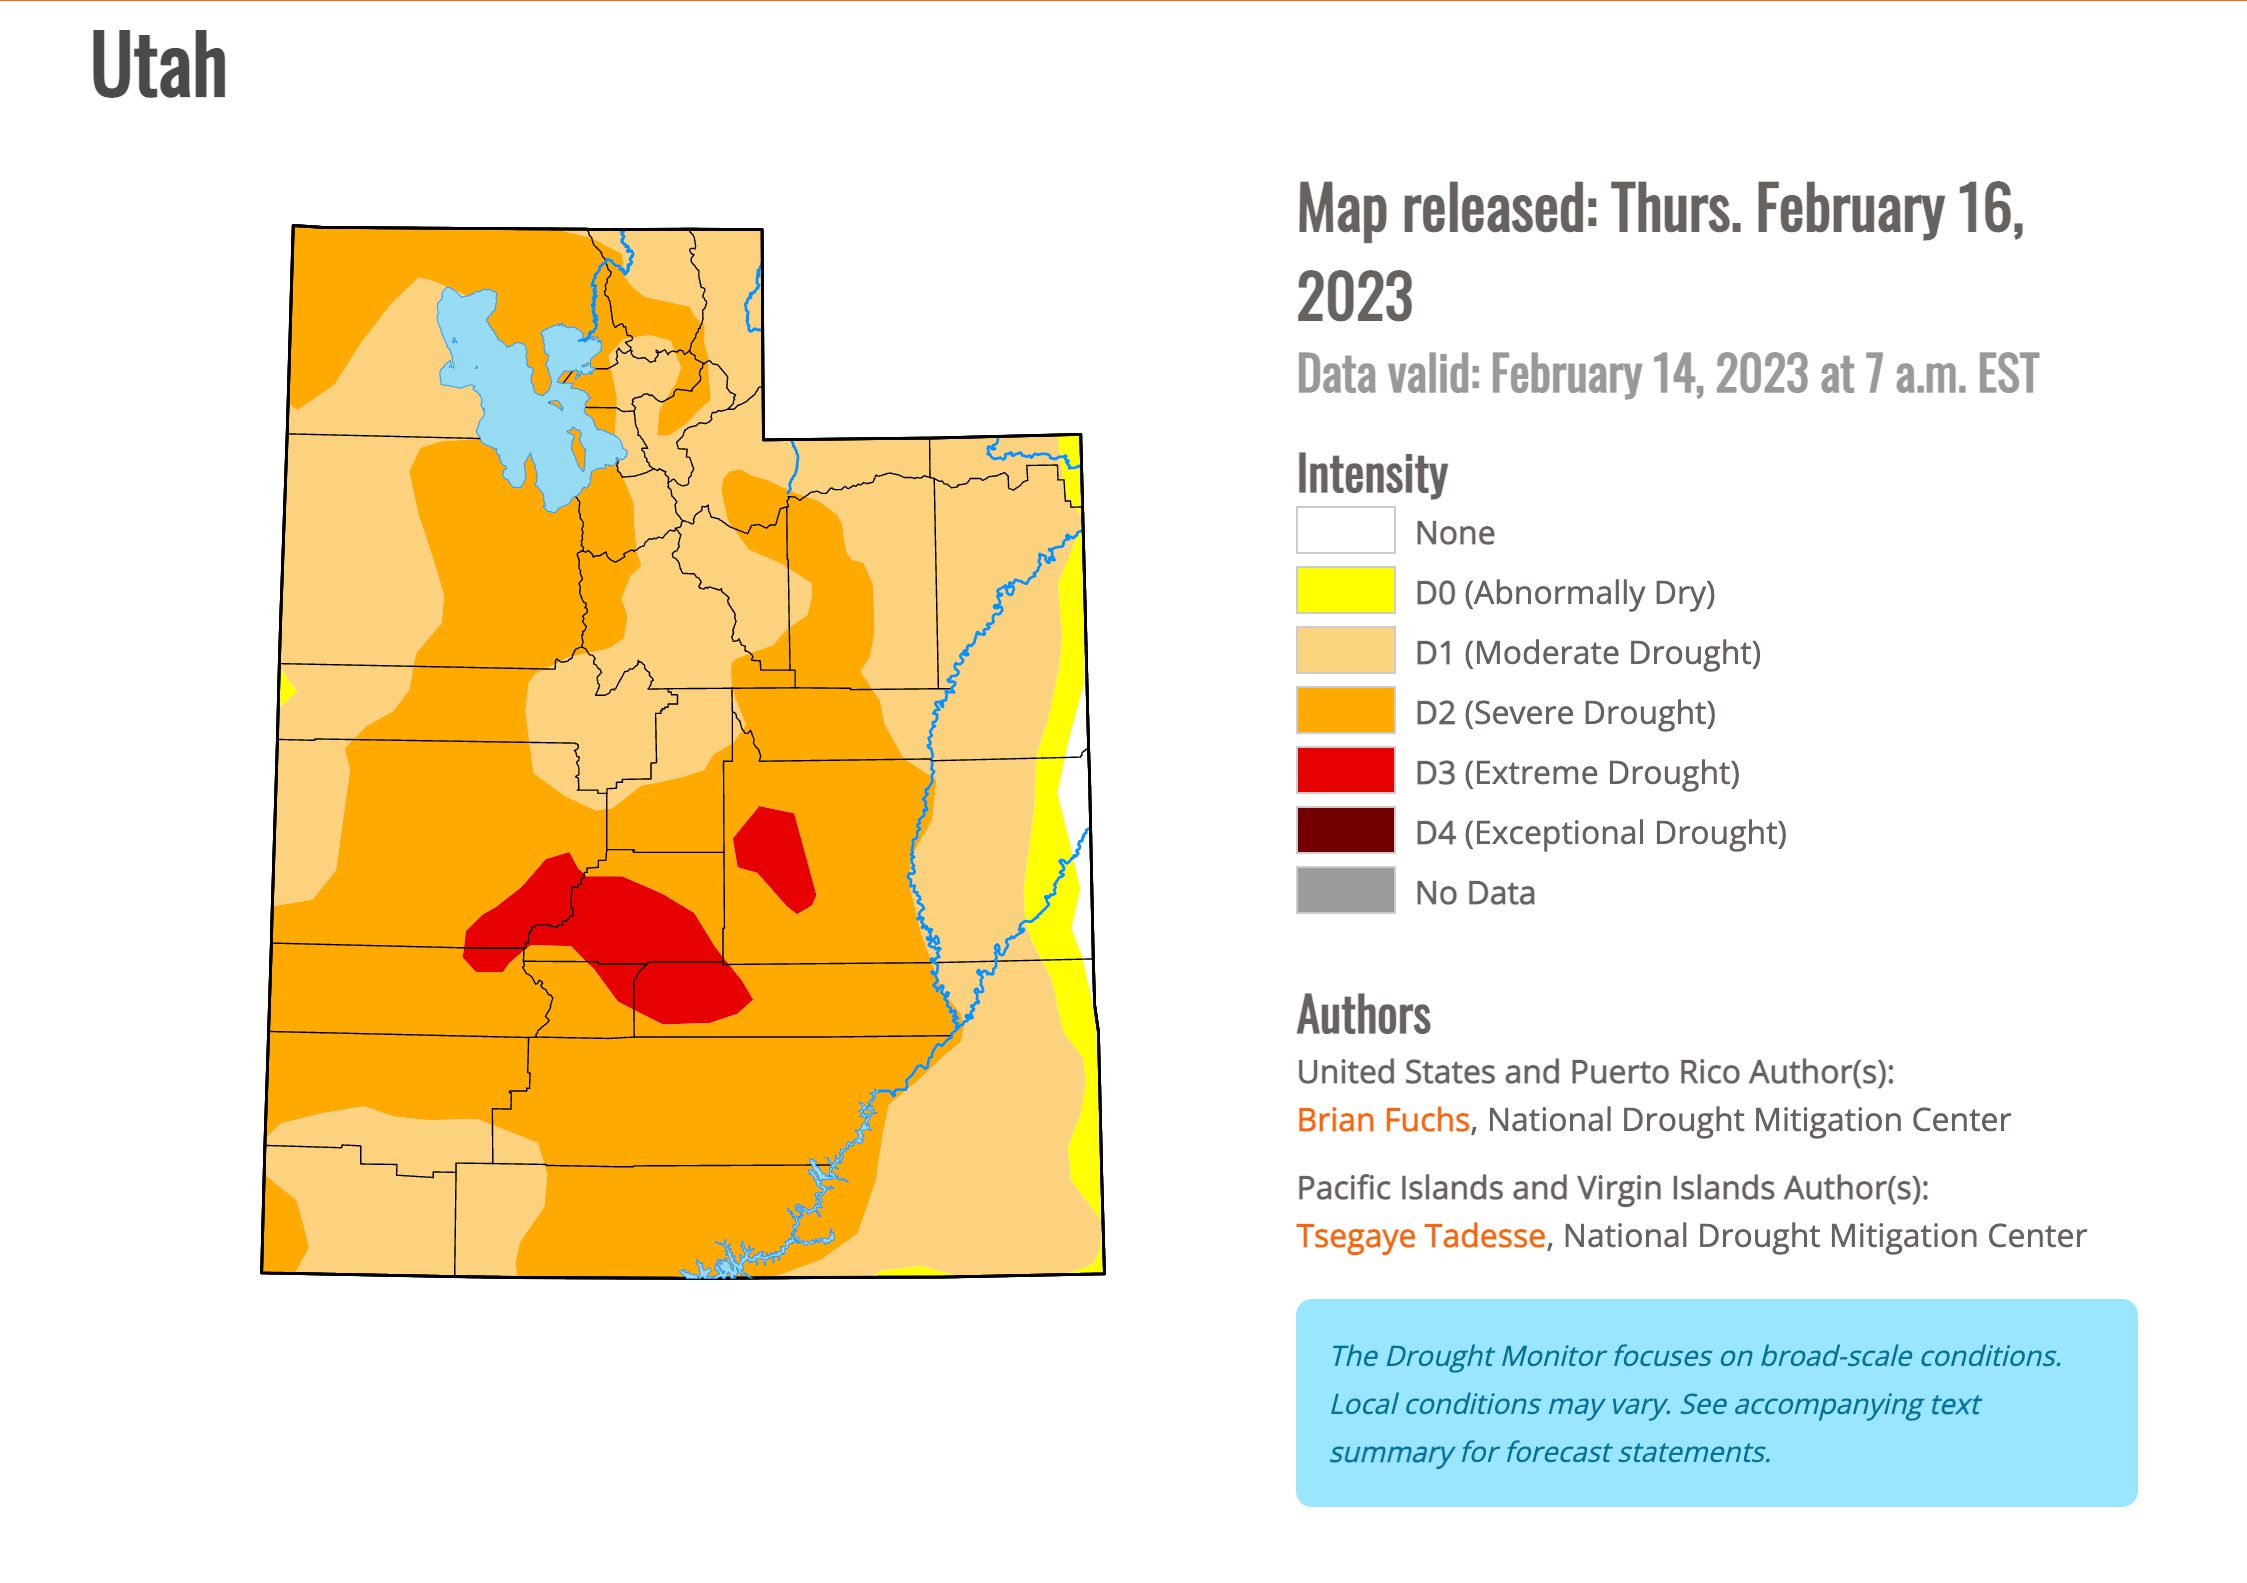 Current drought conditions across Utah as of February 2023.